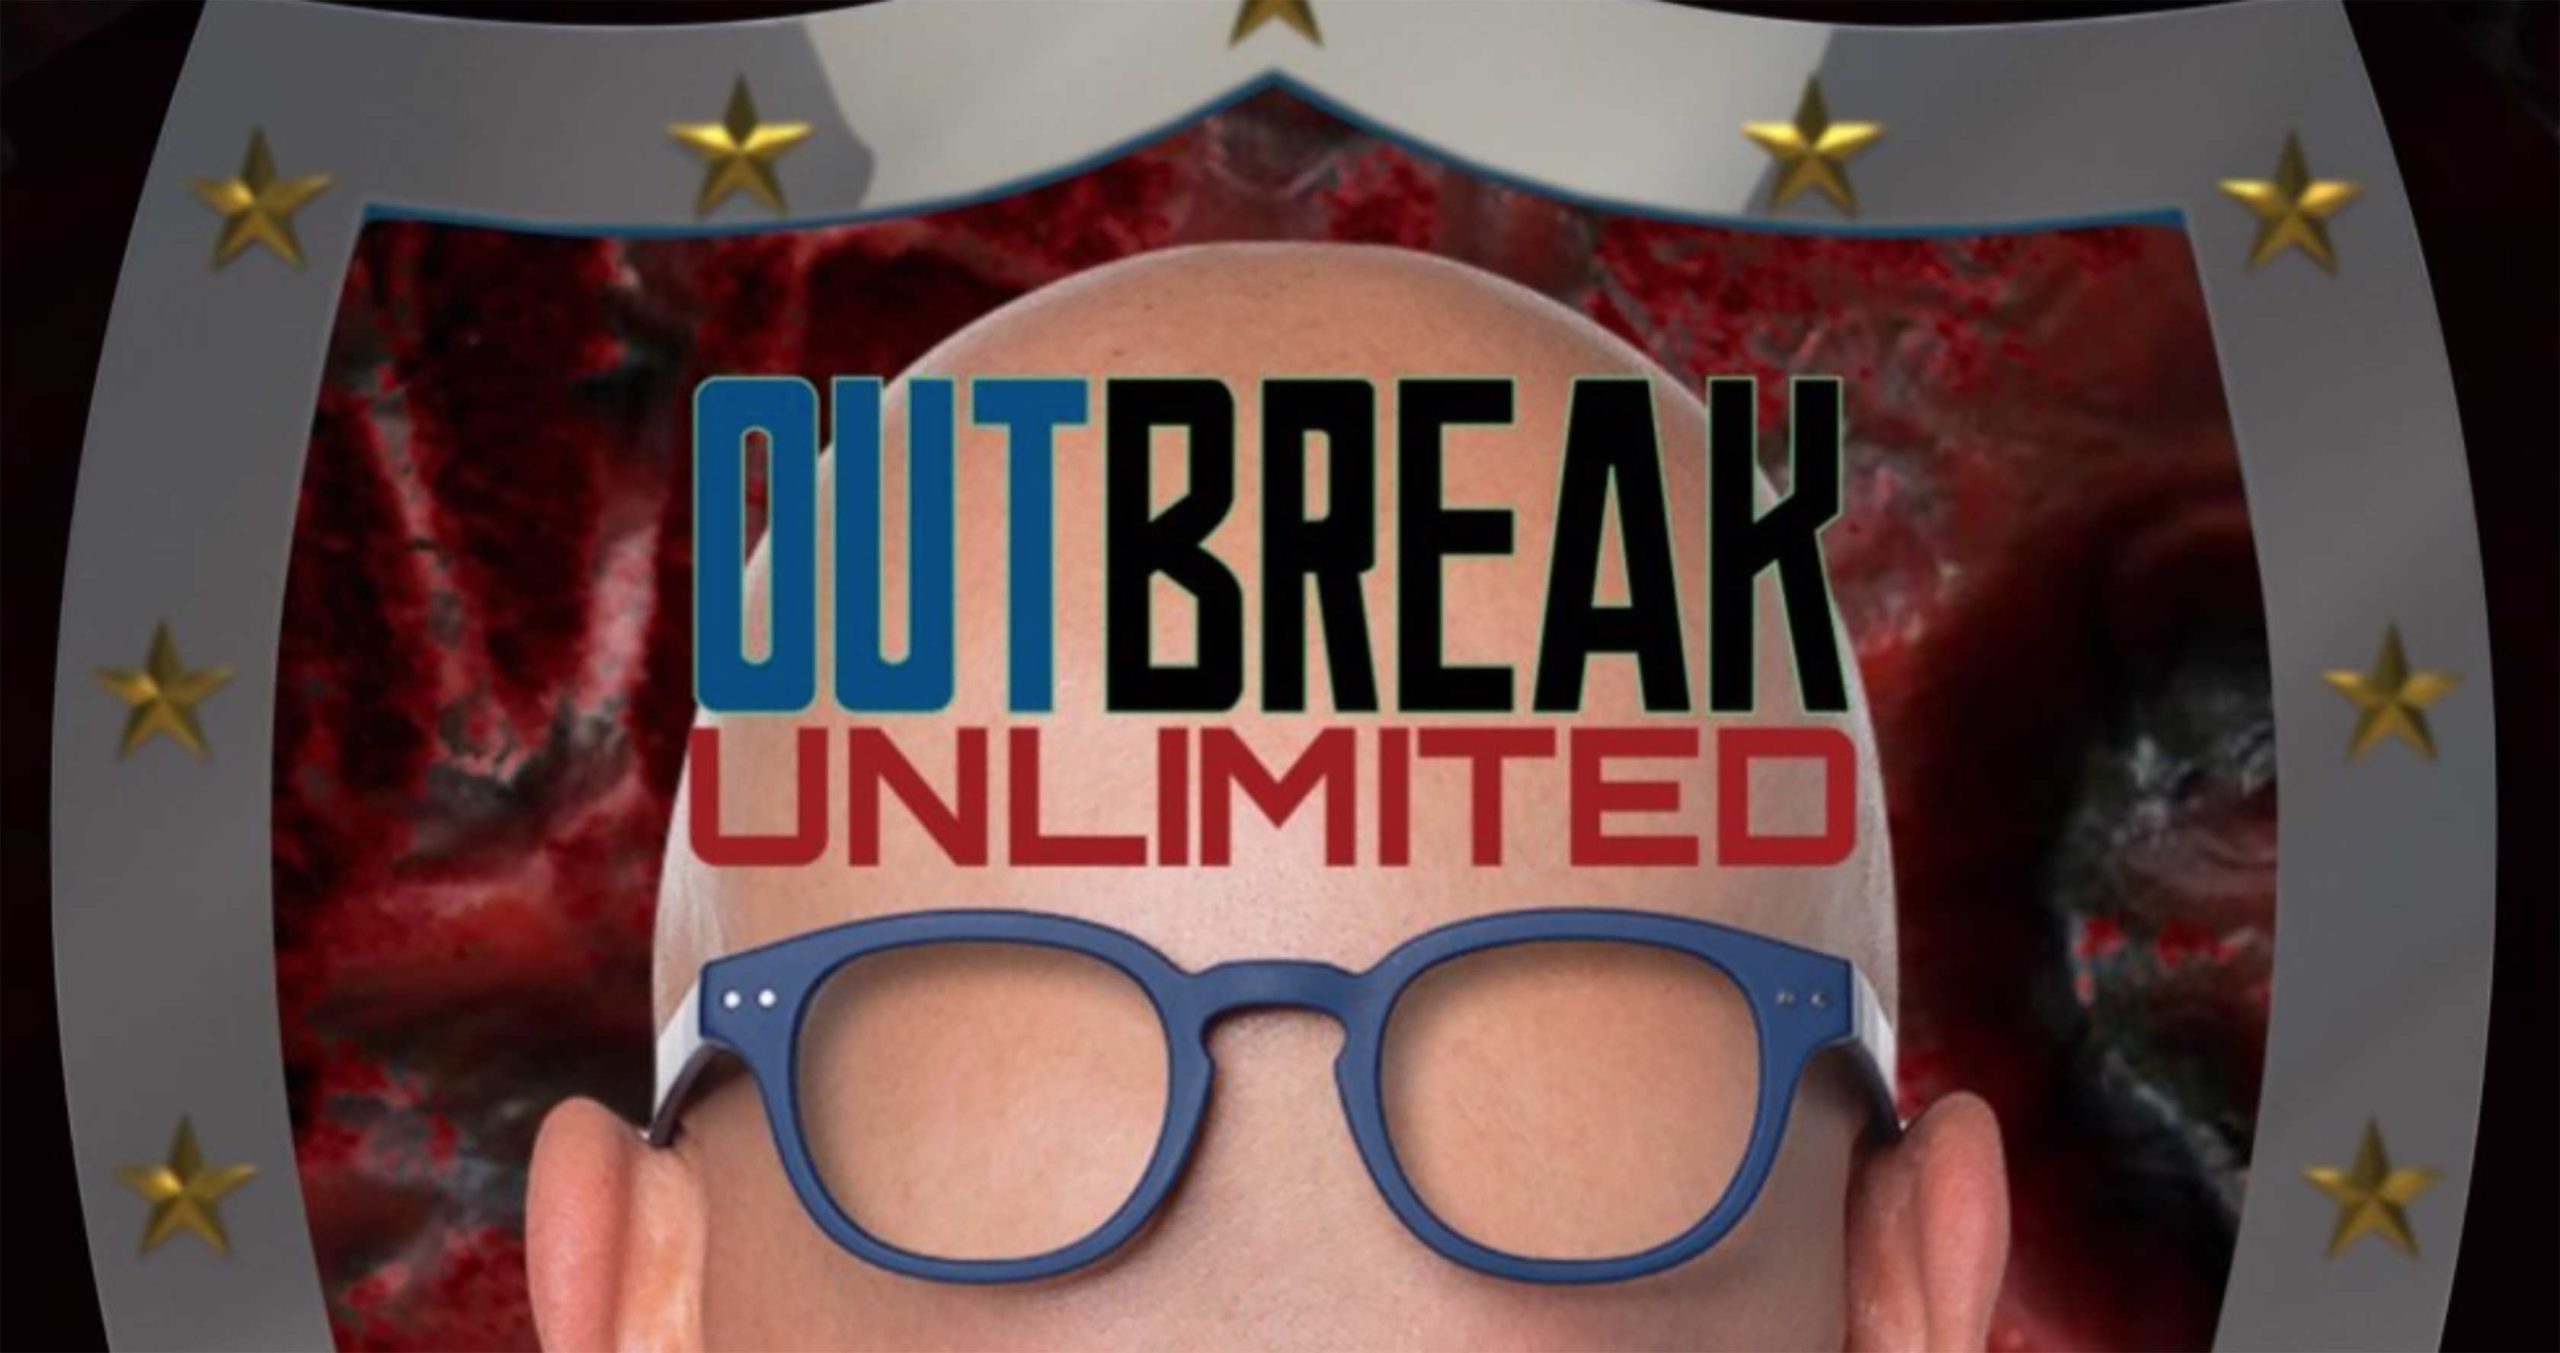 Outbreak Unlimited